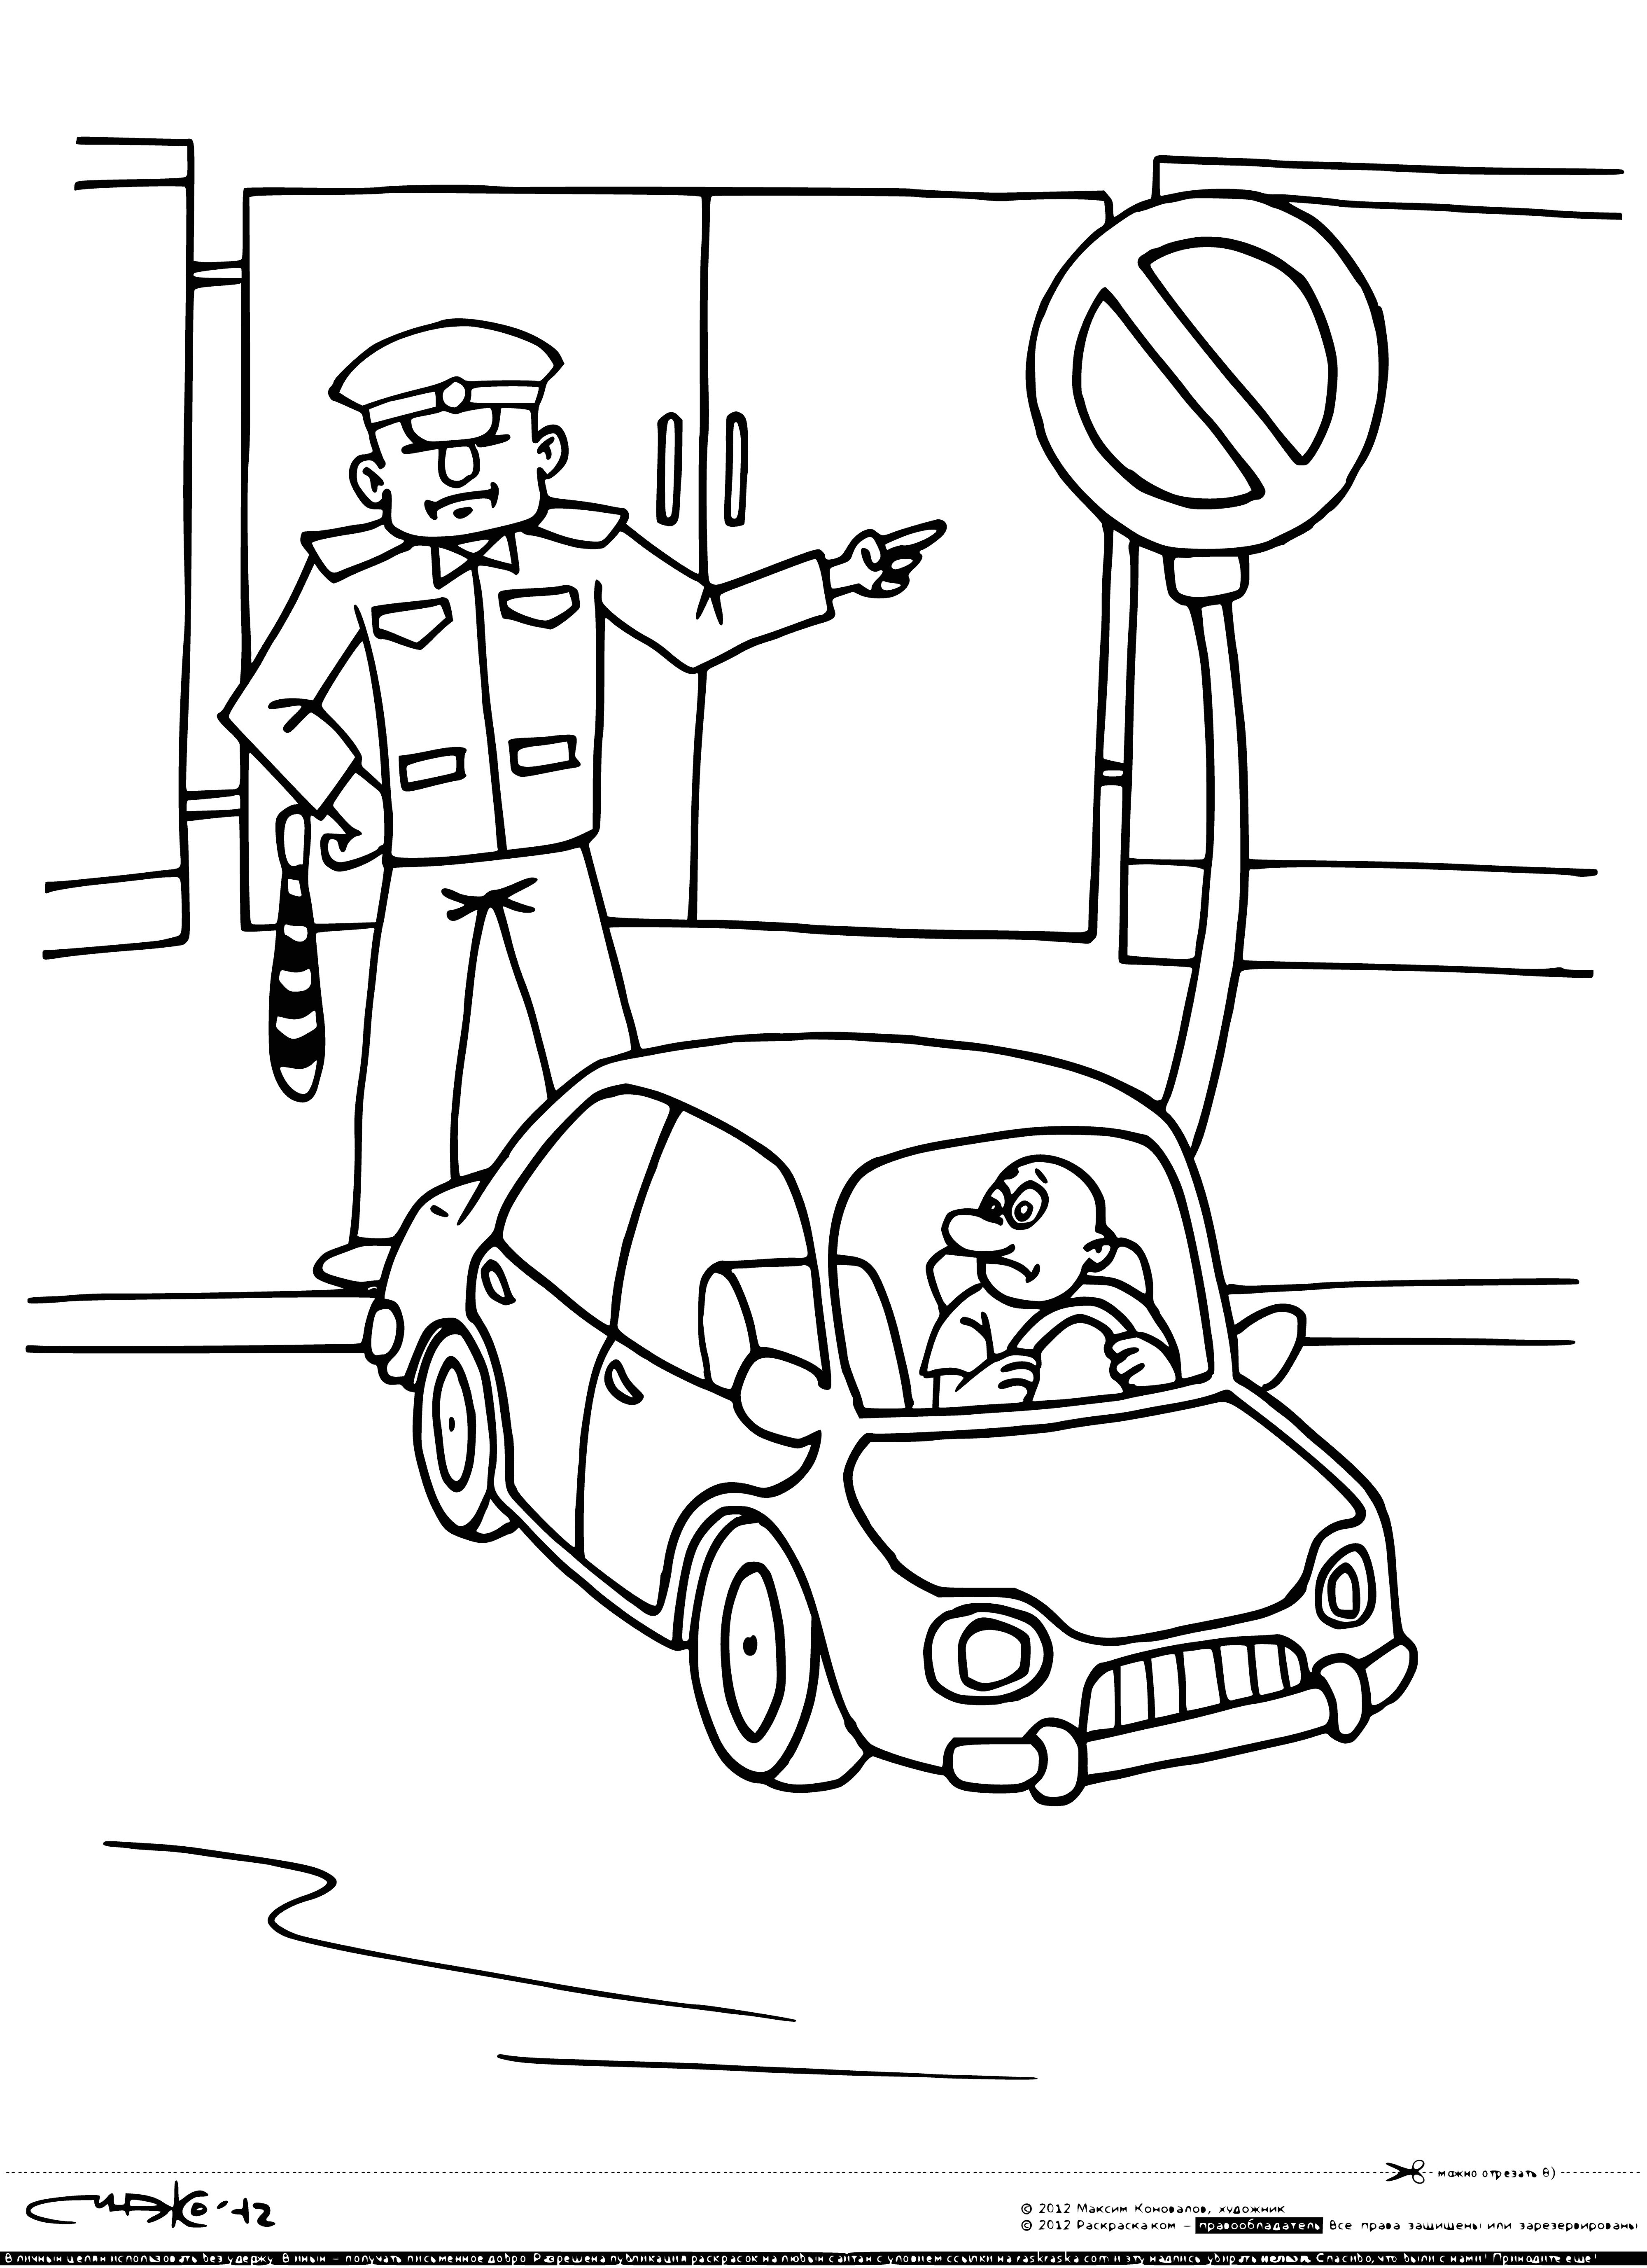 coloring page: #NoParking

No parking allowed in this area - indicated by road sign. #NoParking